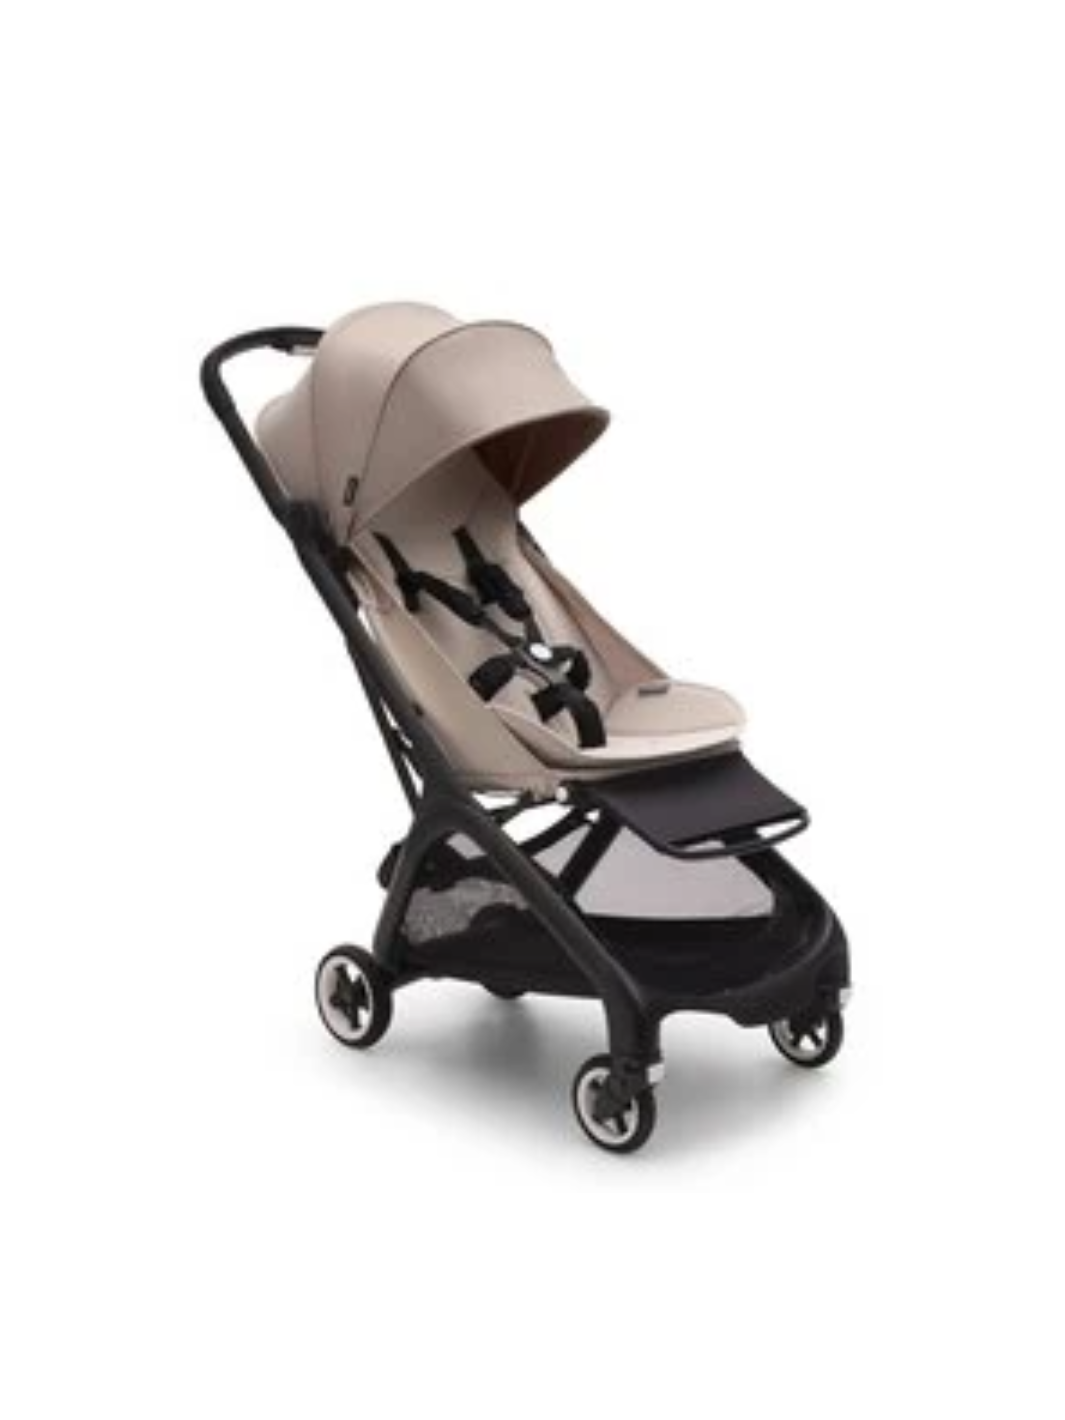 Butterfly Complete Reisebuggy - Desert Taupe